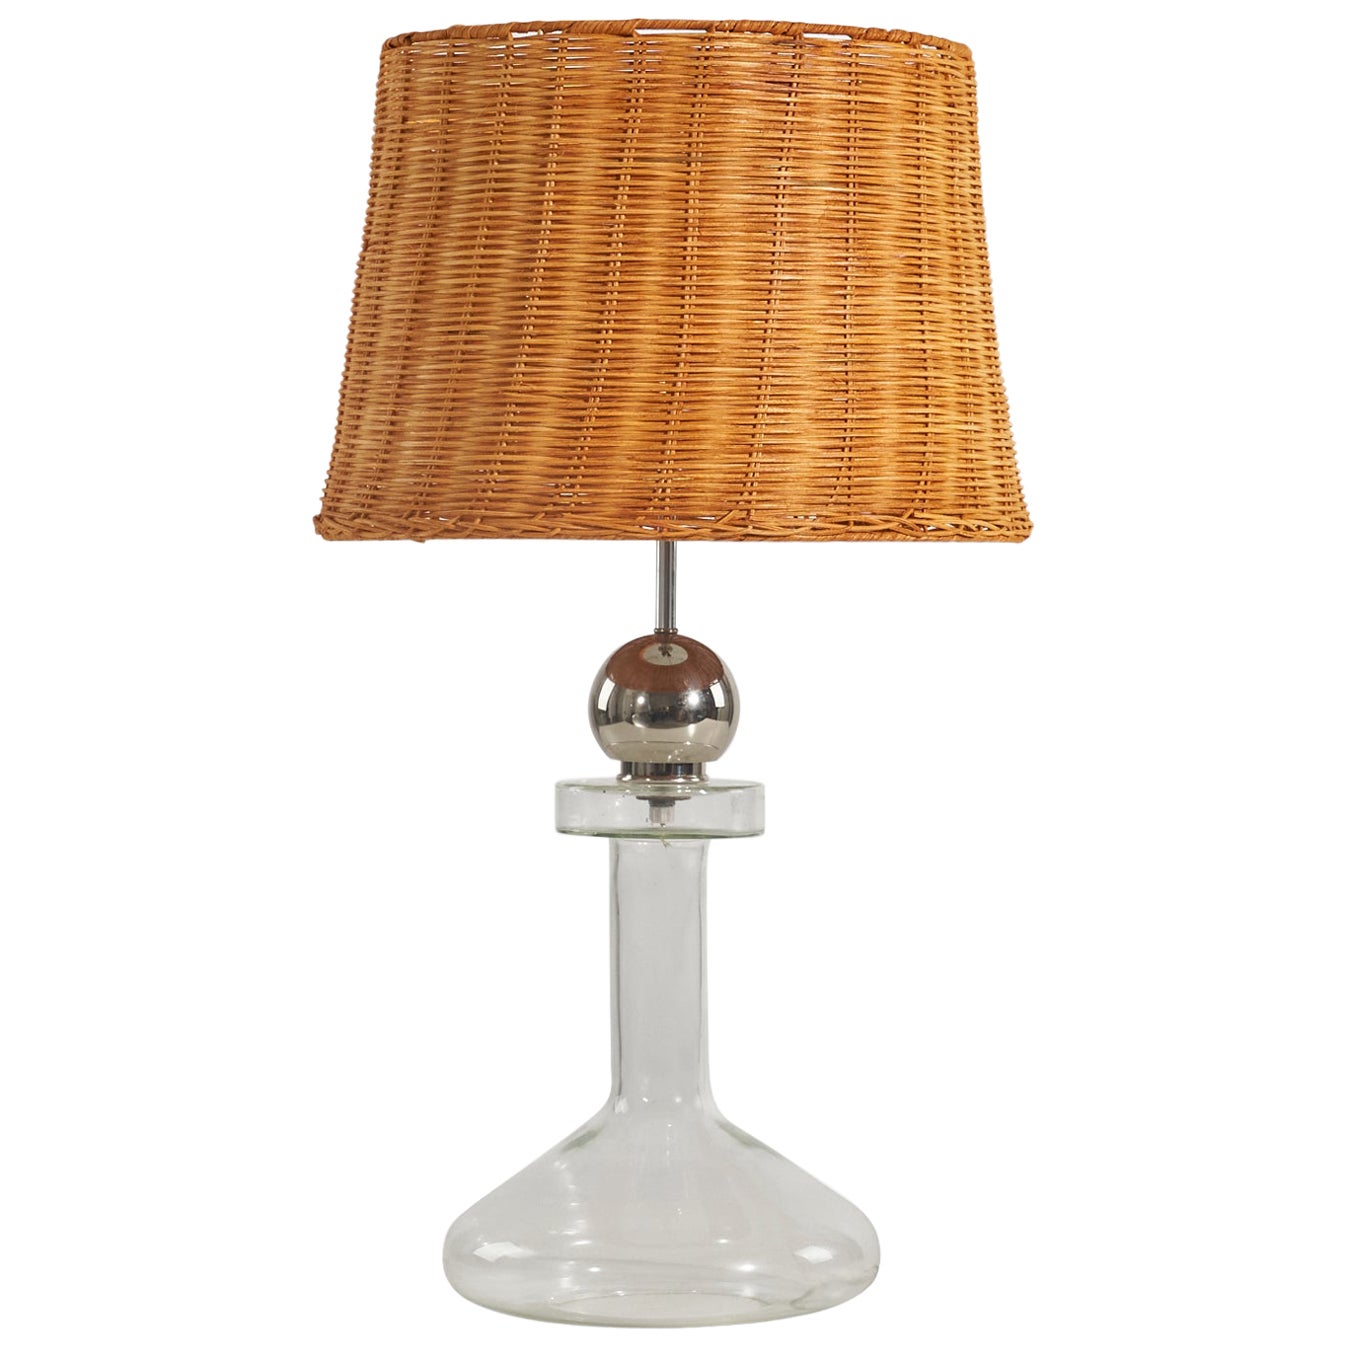 Laurel Lamp Co., Table Lamp, Chrome Metal, Glass, Rattan, United States, 1970s For Sale